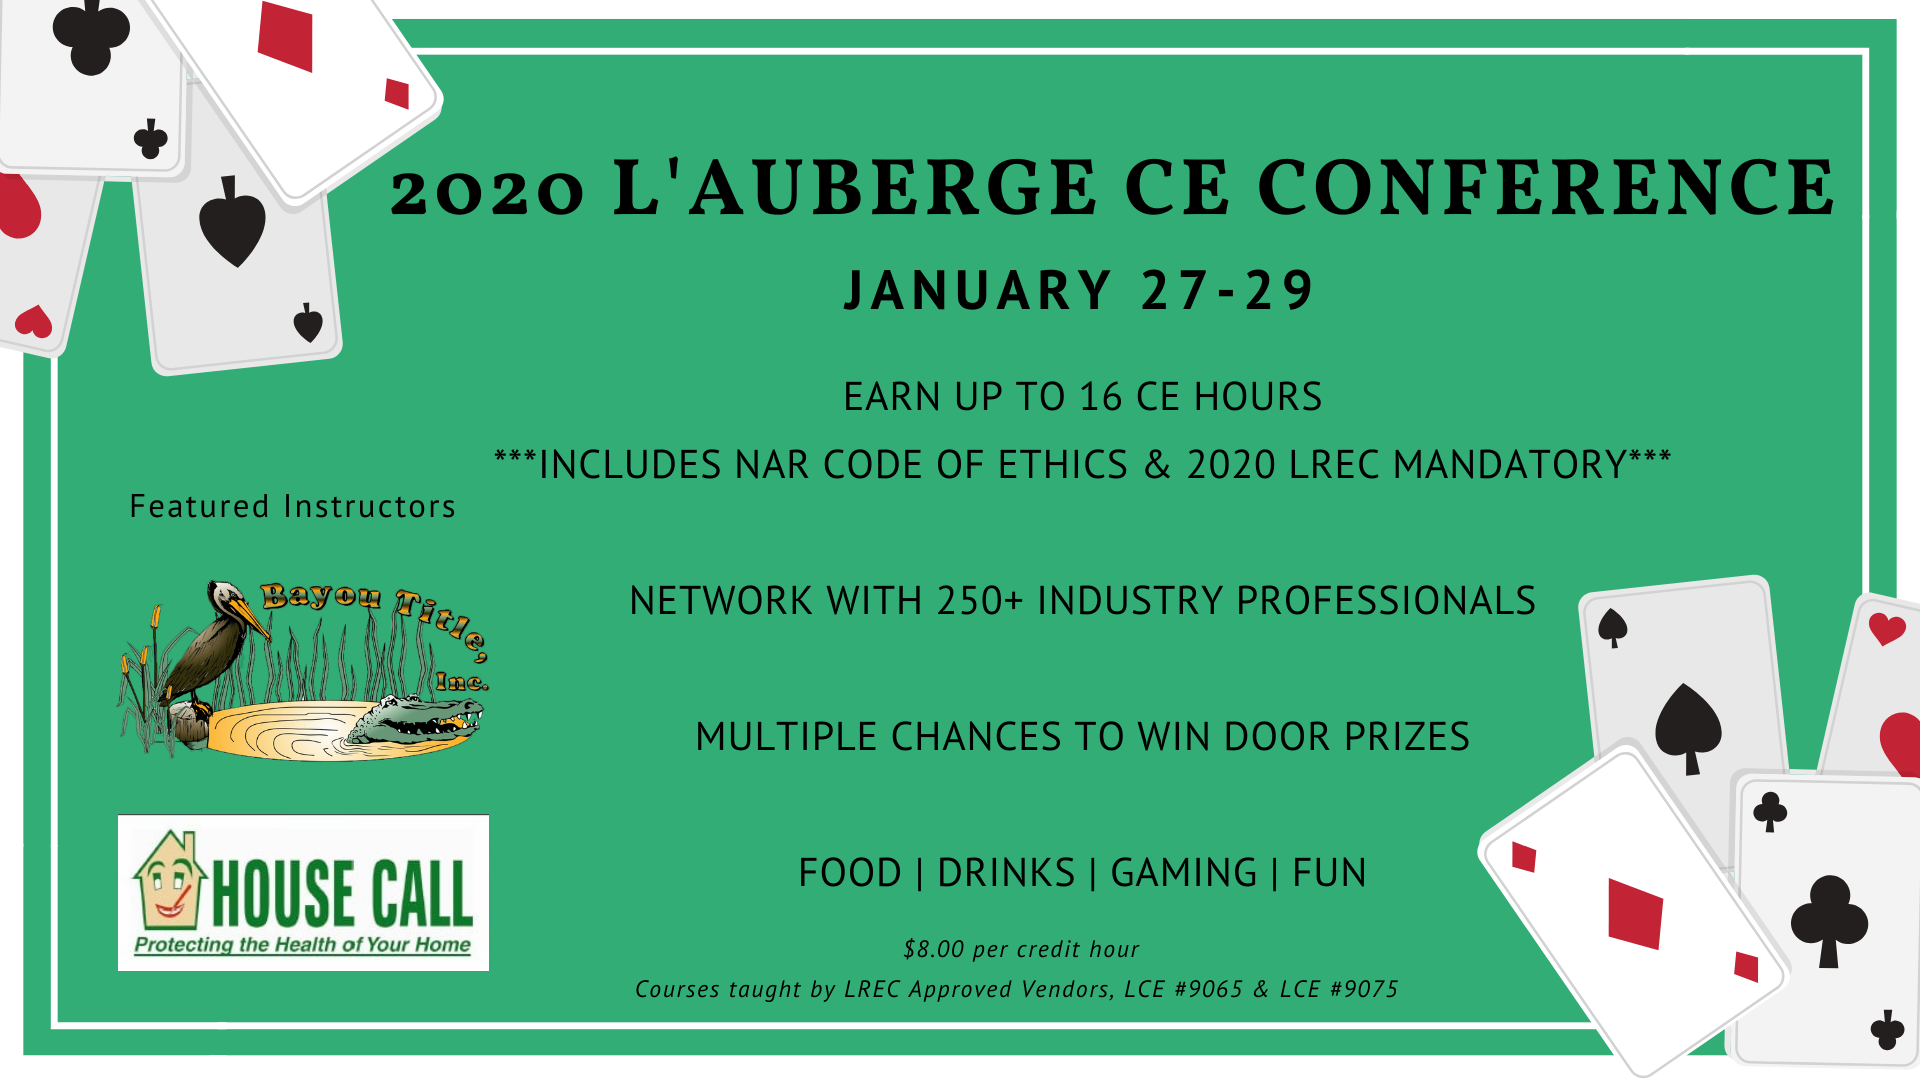 2020 Bayou Title, Inc. CE Conference